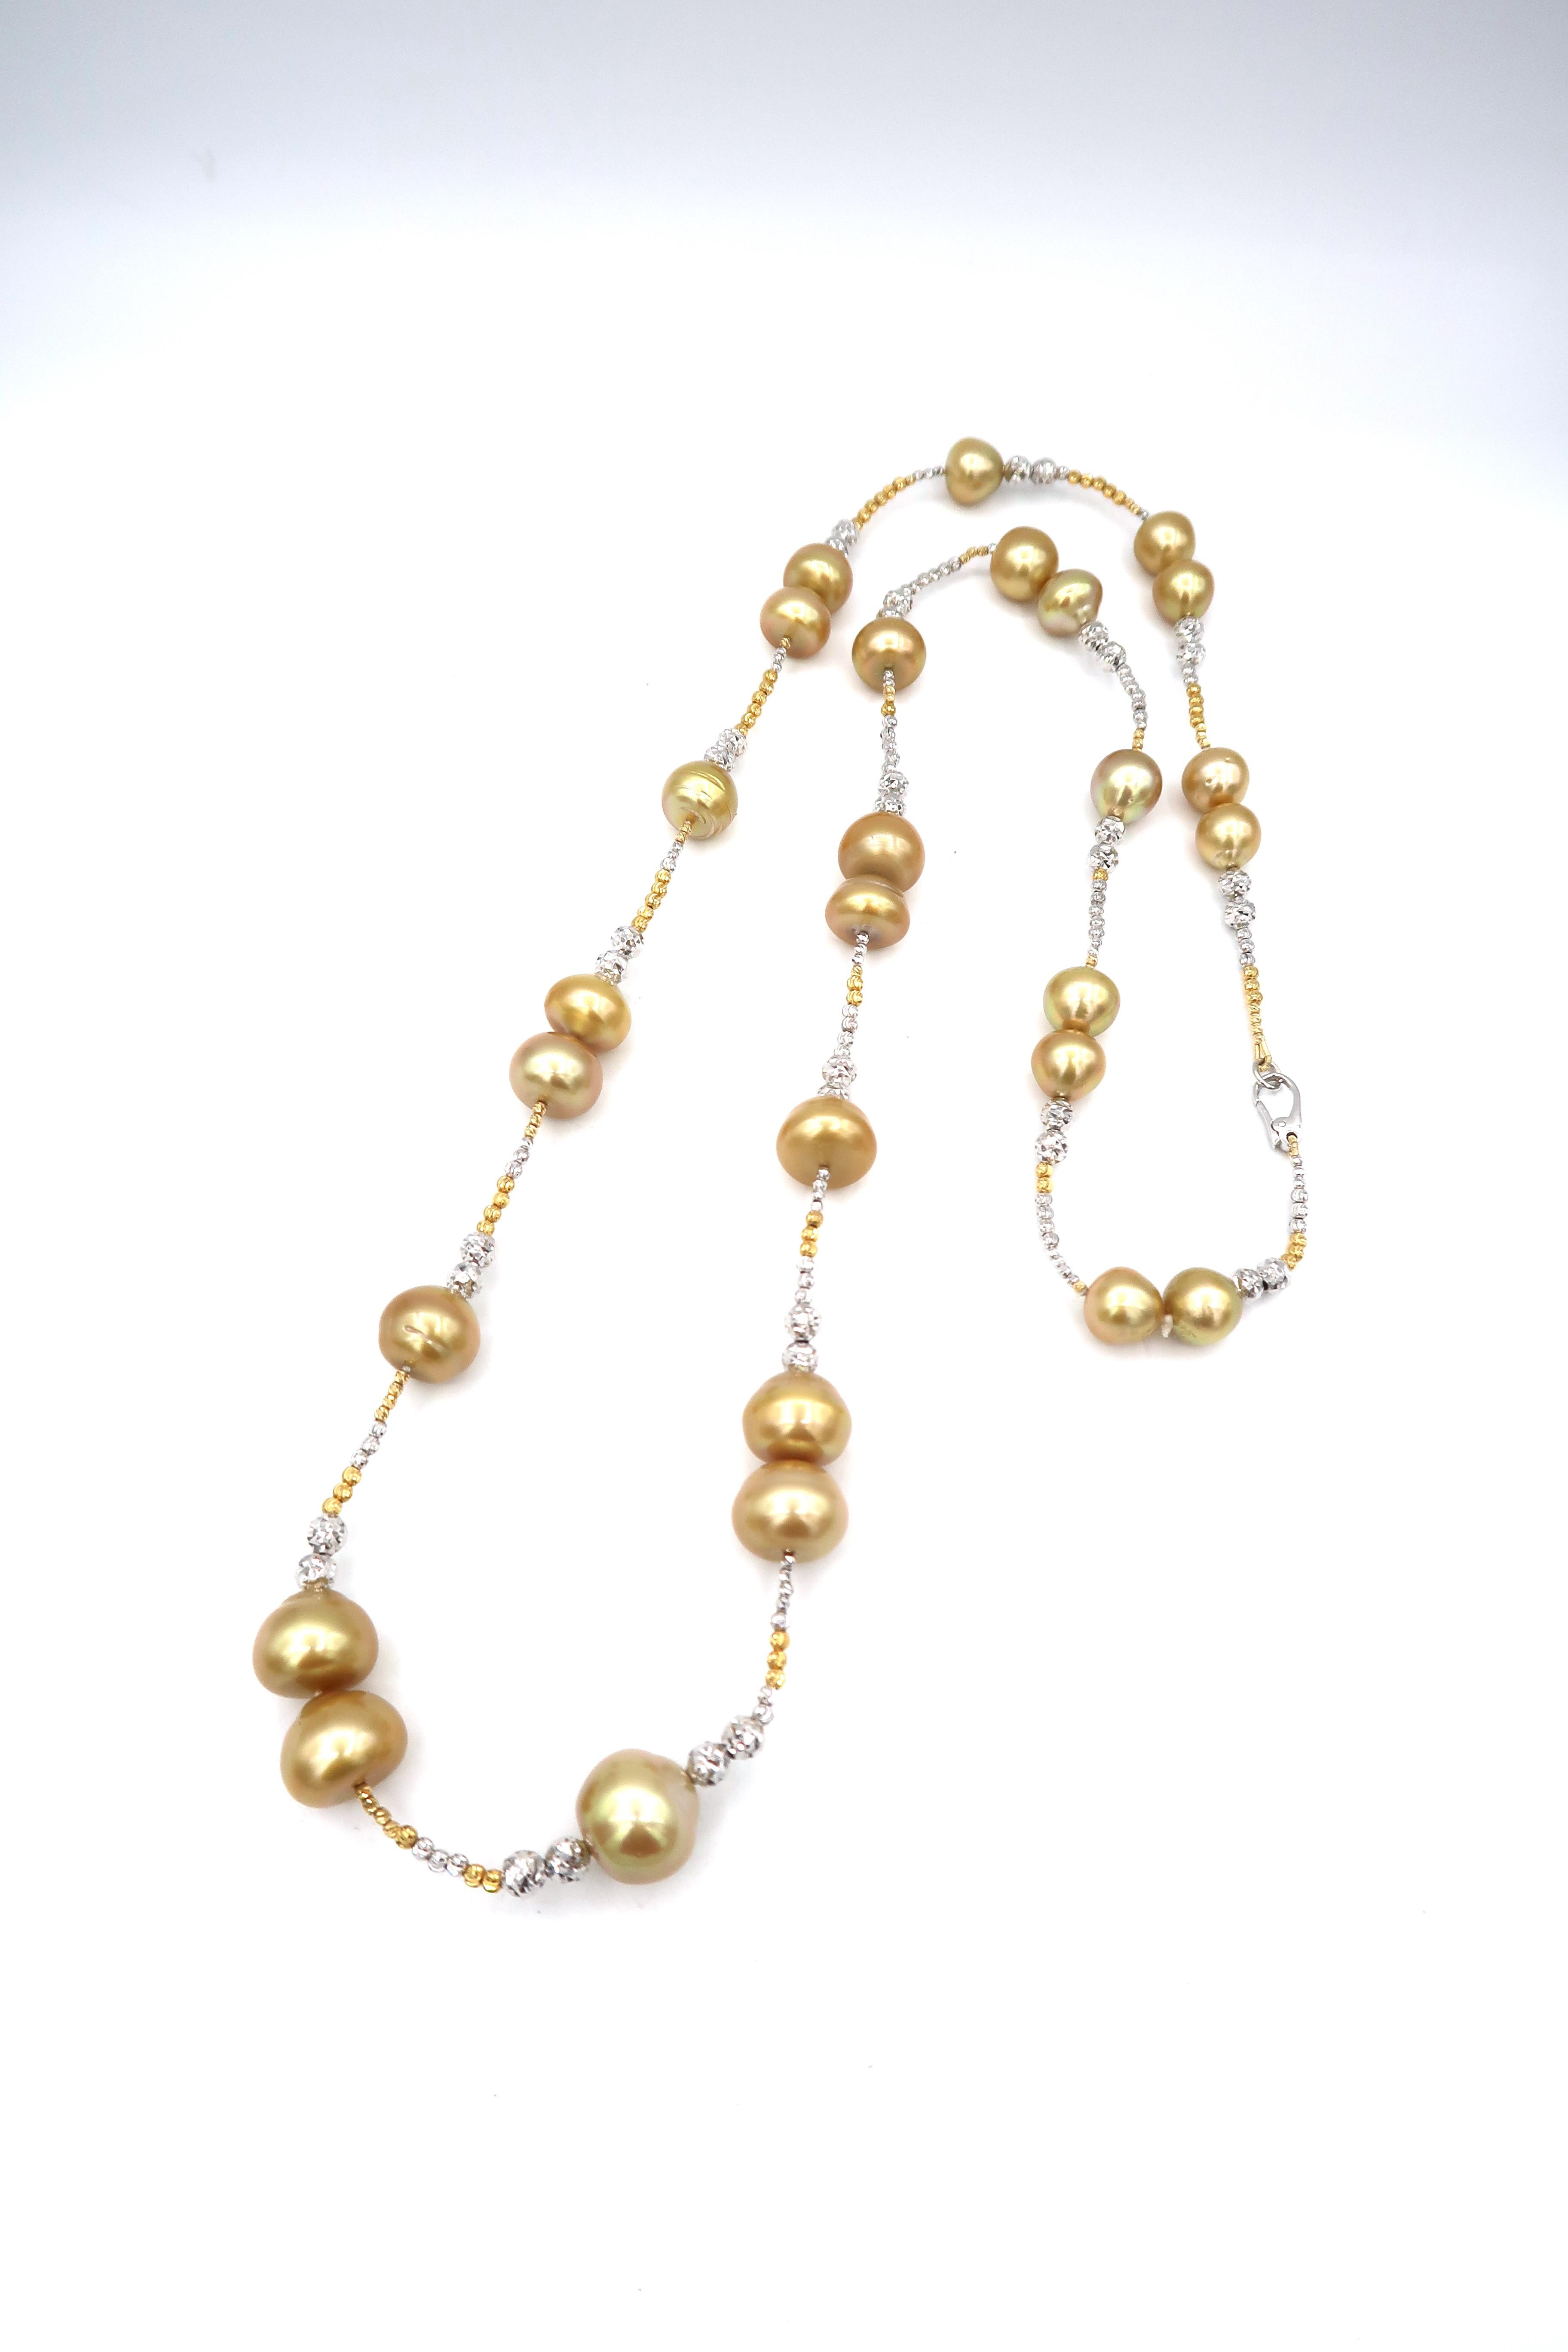 BOON Long Strand Gold South Sea Pearl Necklace

Length: 34.75